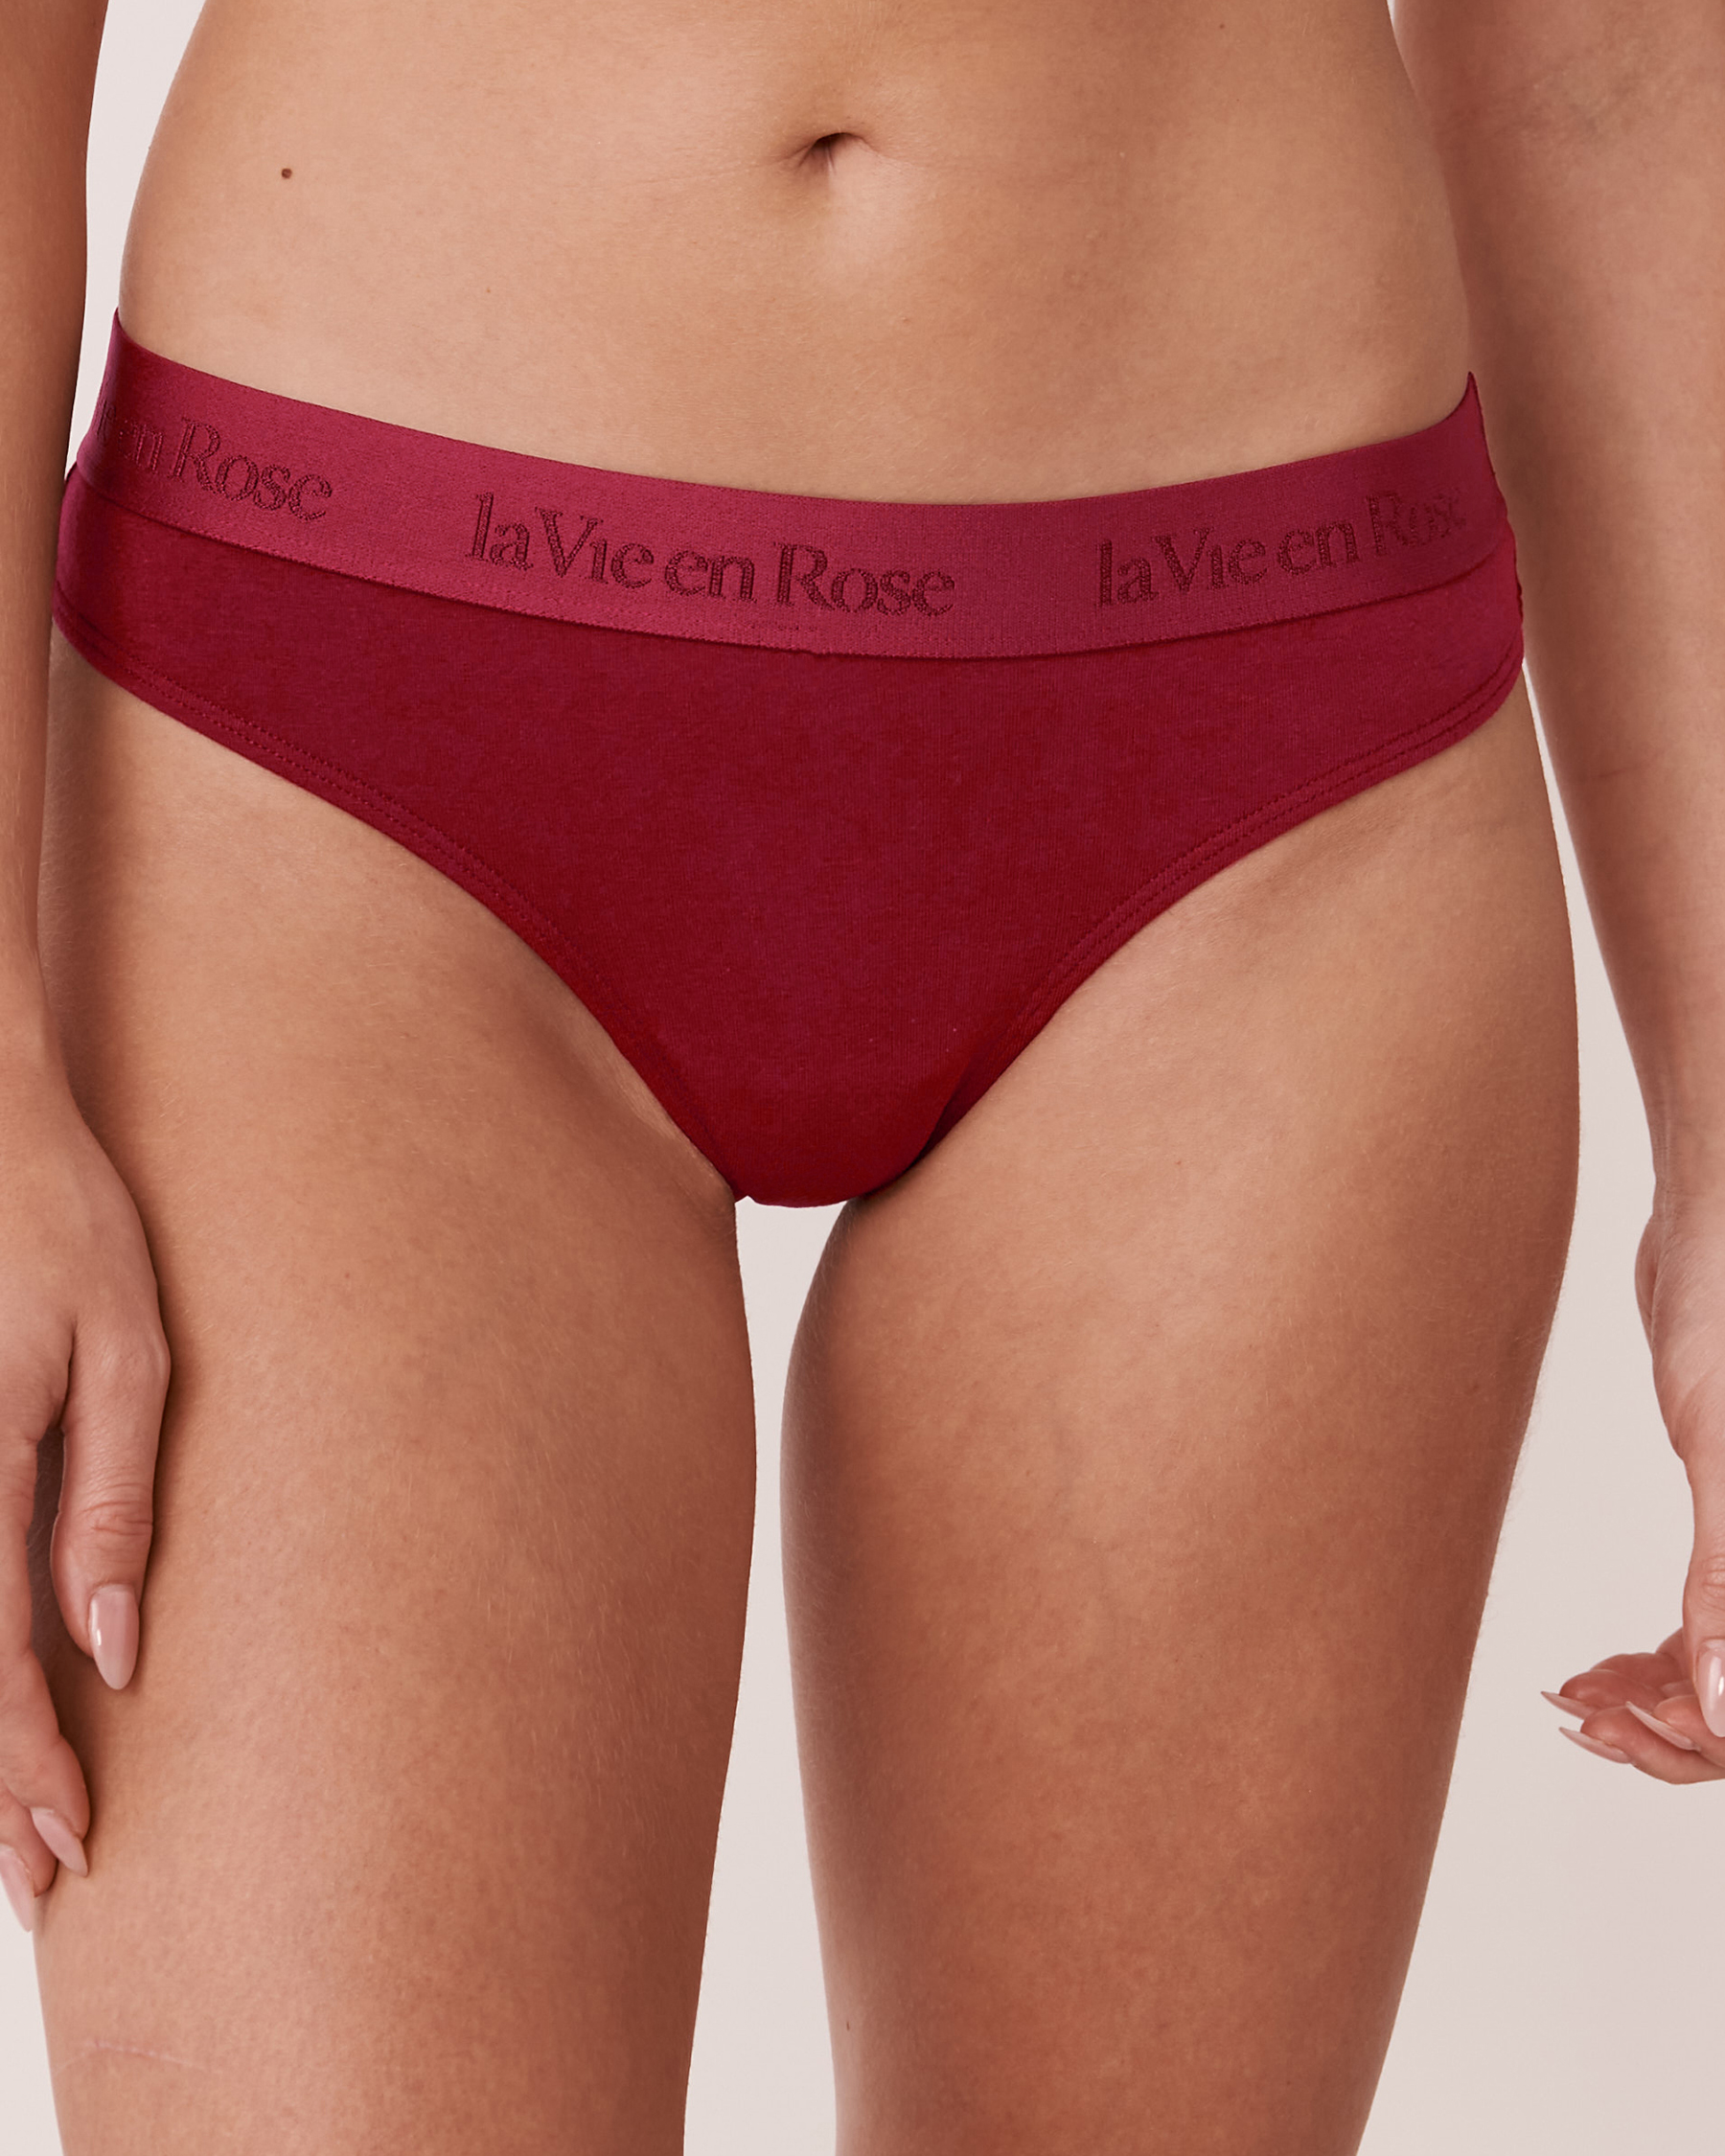 LA VIE EN ROSE Cotton and Logo Elastic Band Thong Panty Red wine 20100212 - View1